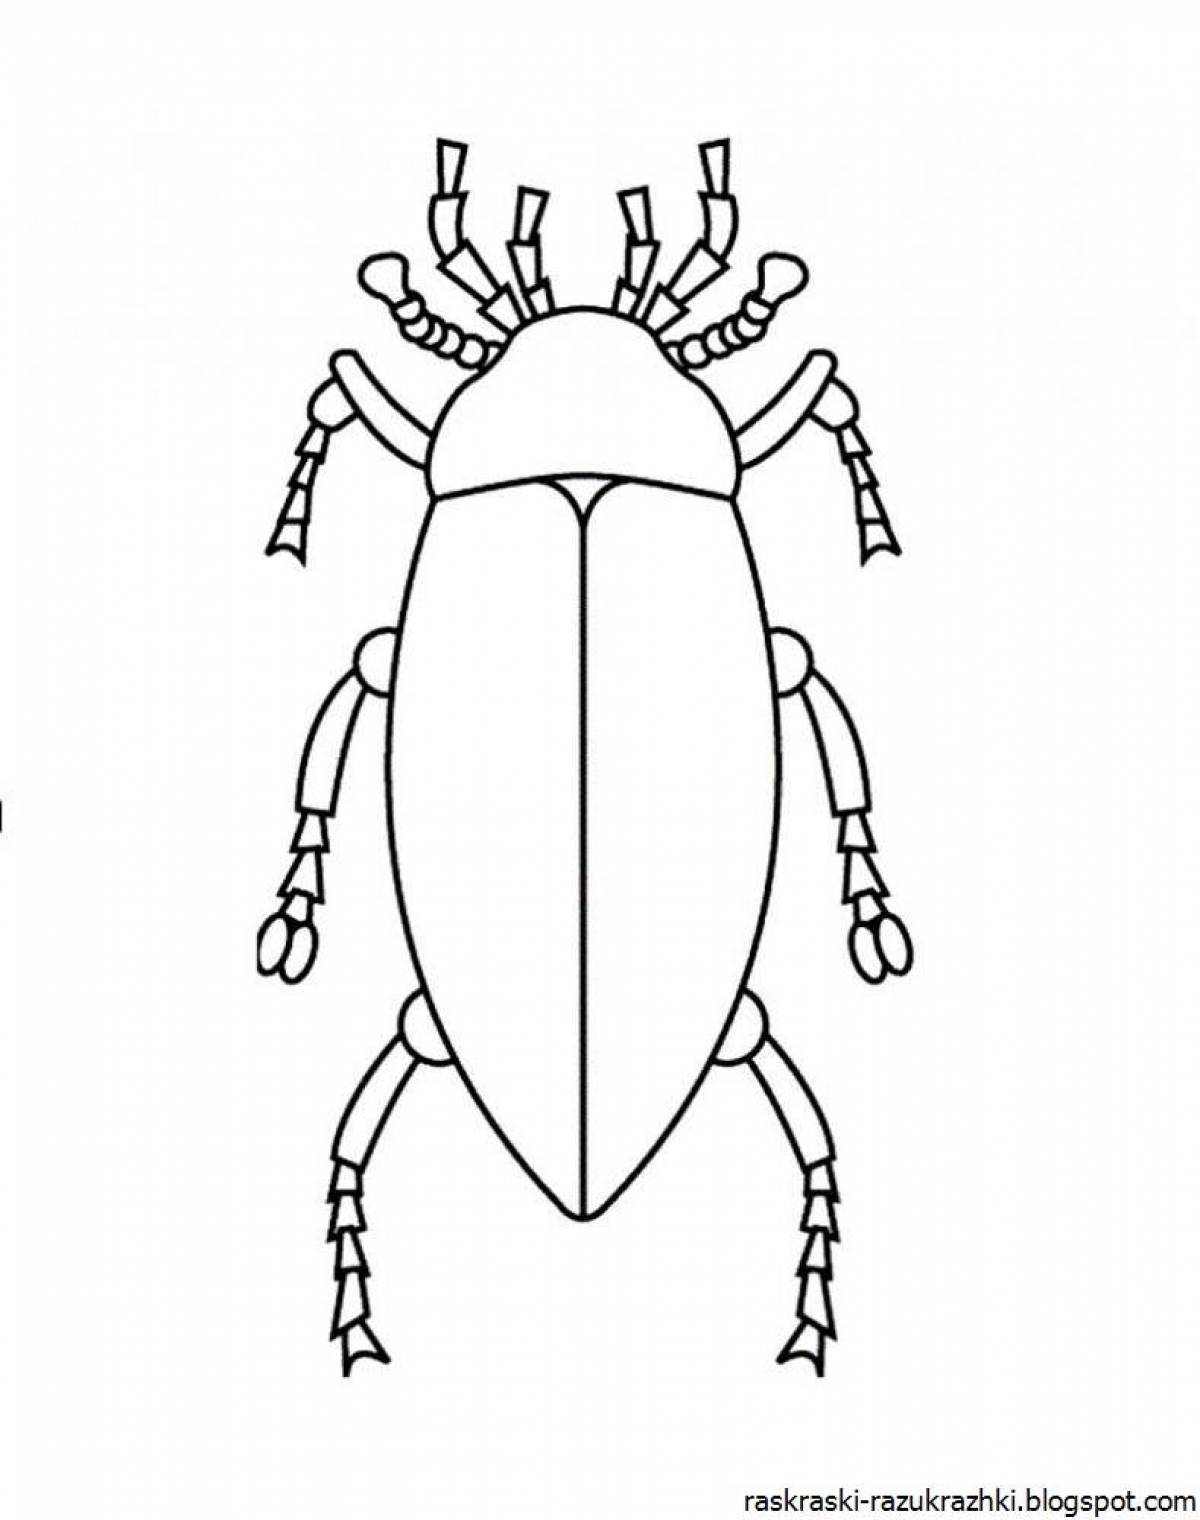 Attractive beetle coloring book for kids